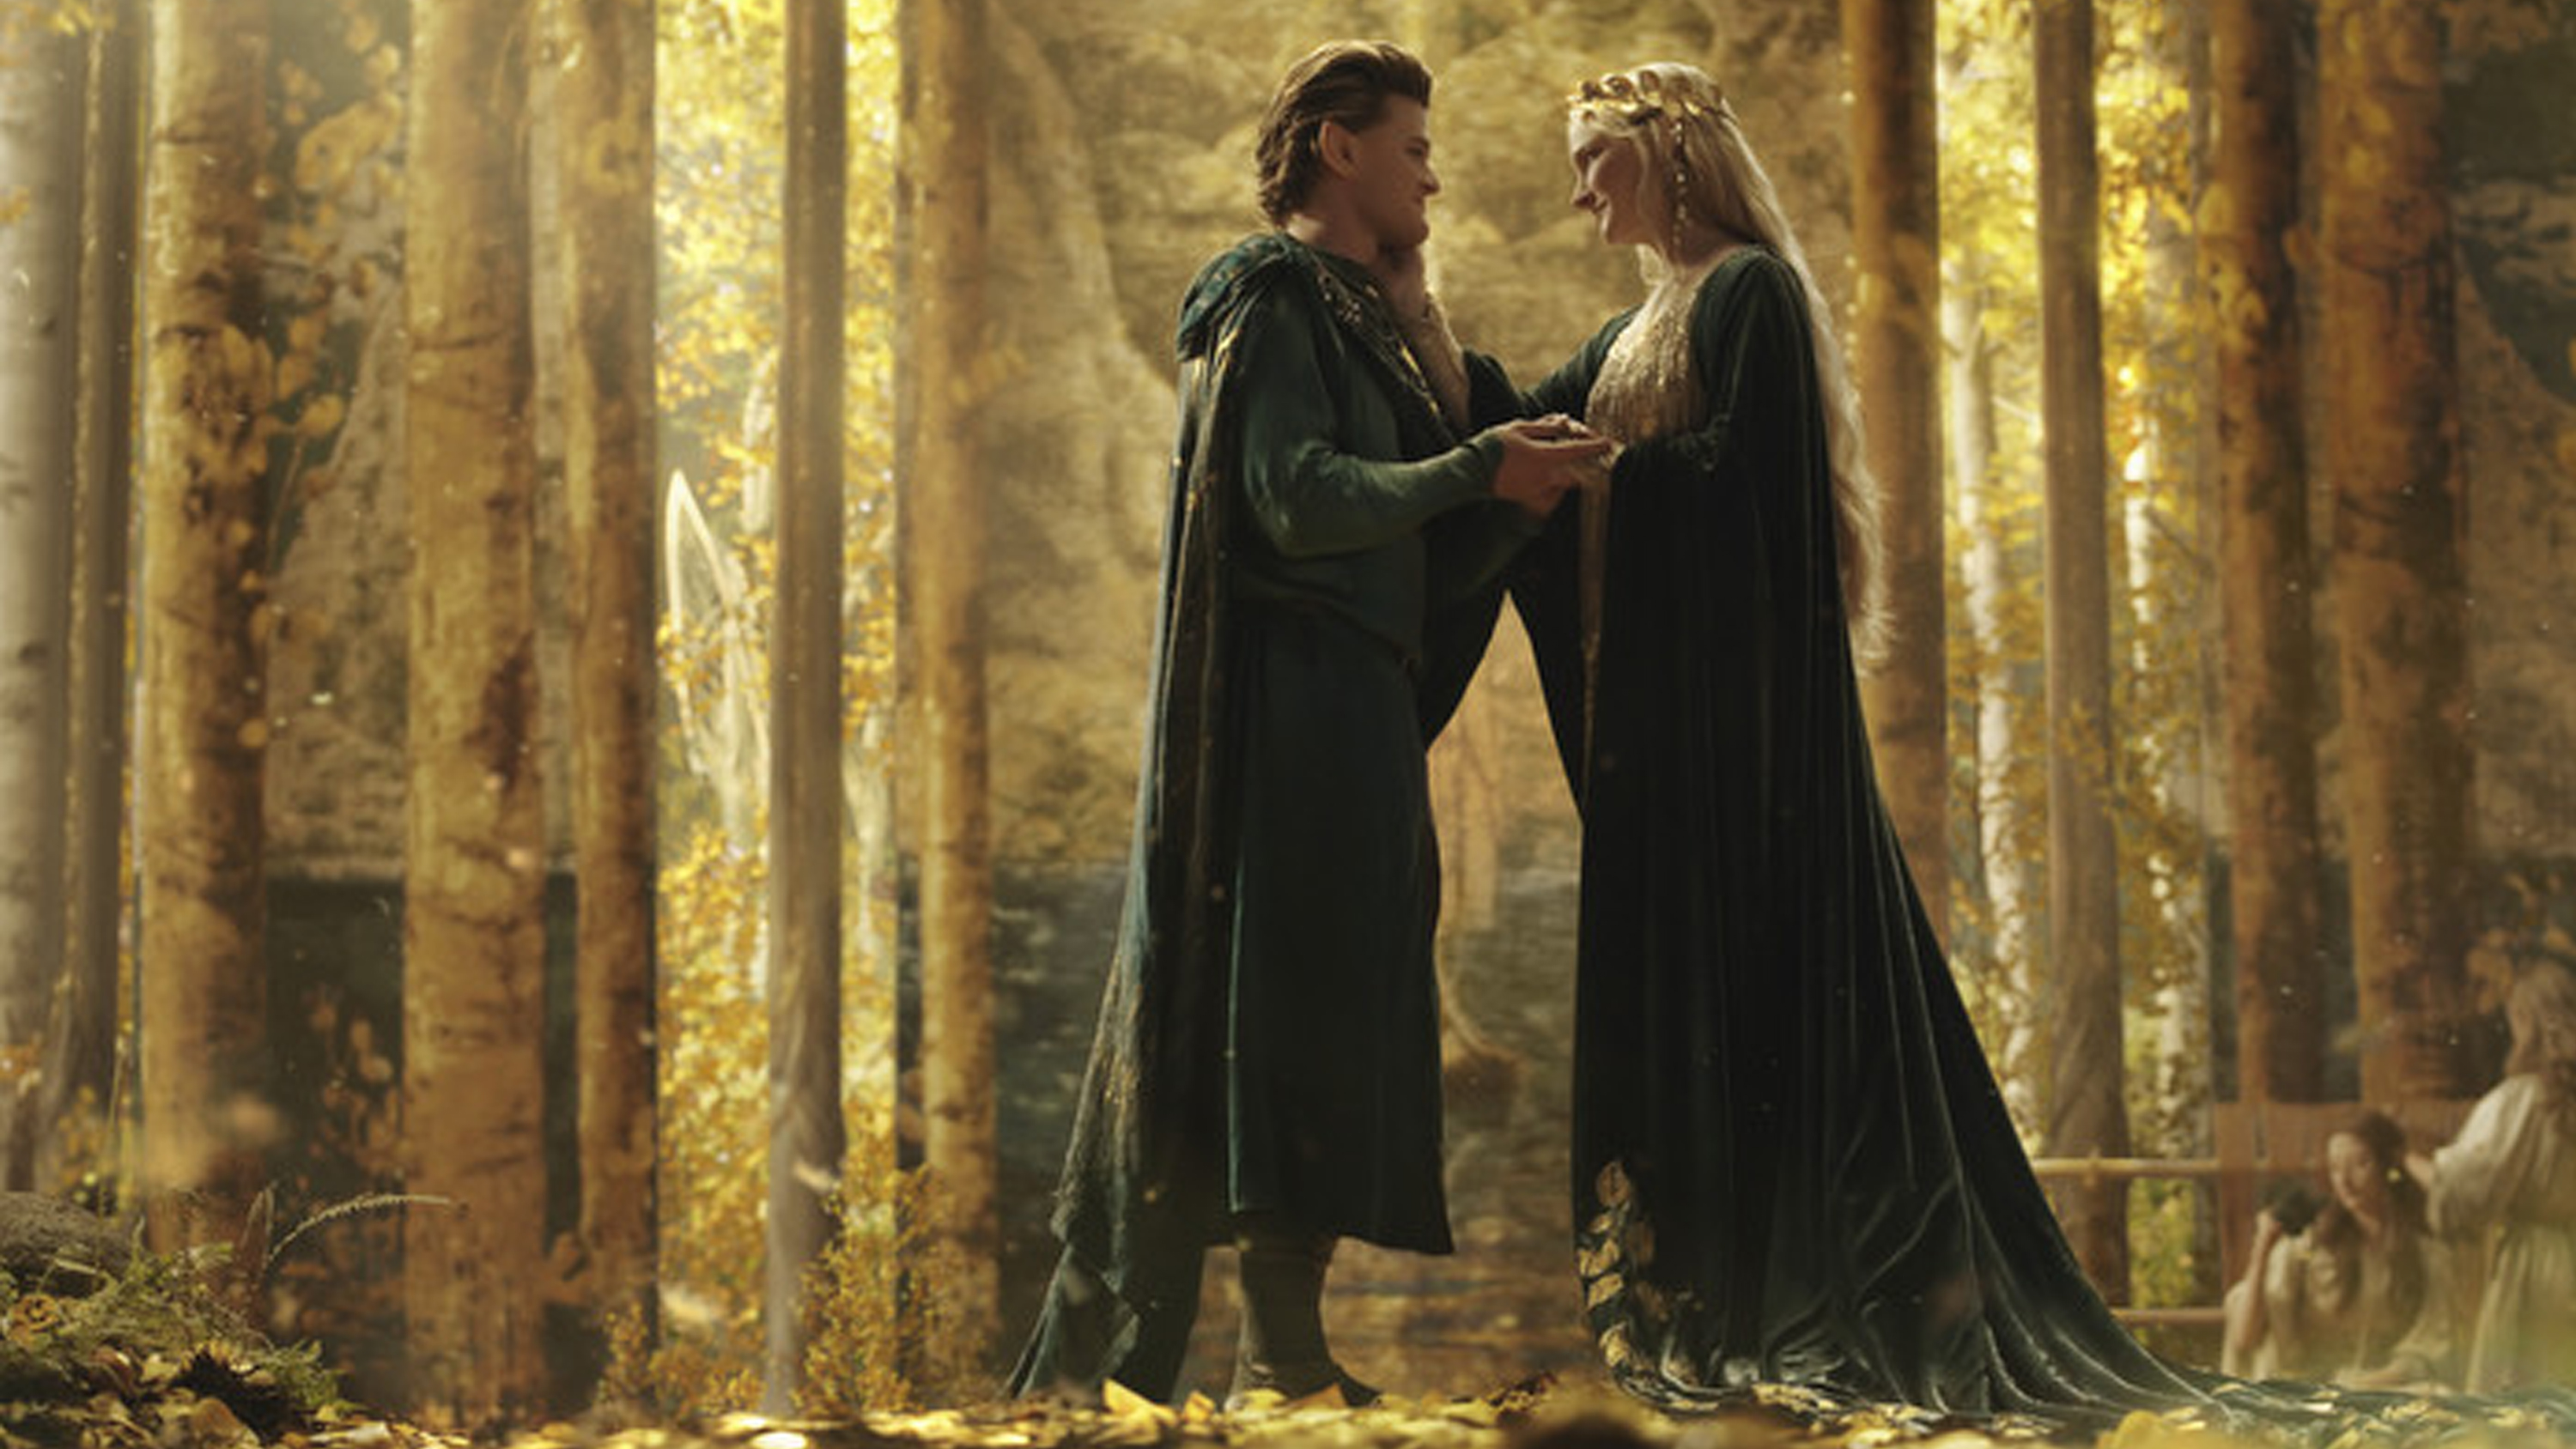 A Second Age Primer: The Rings of Power, the Rise and Fall of Númenor, and  the Last Alliance